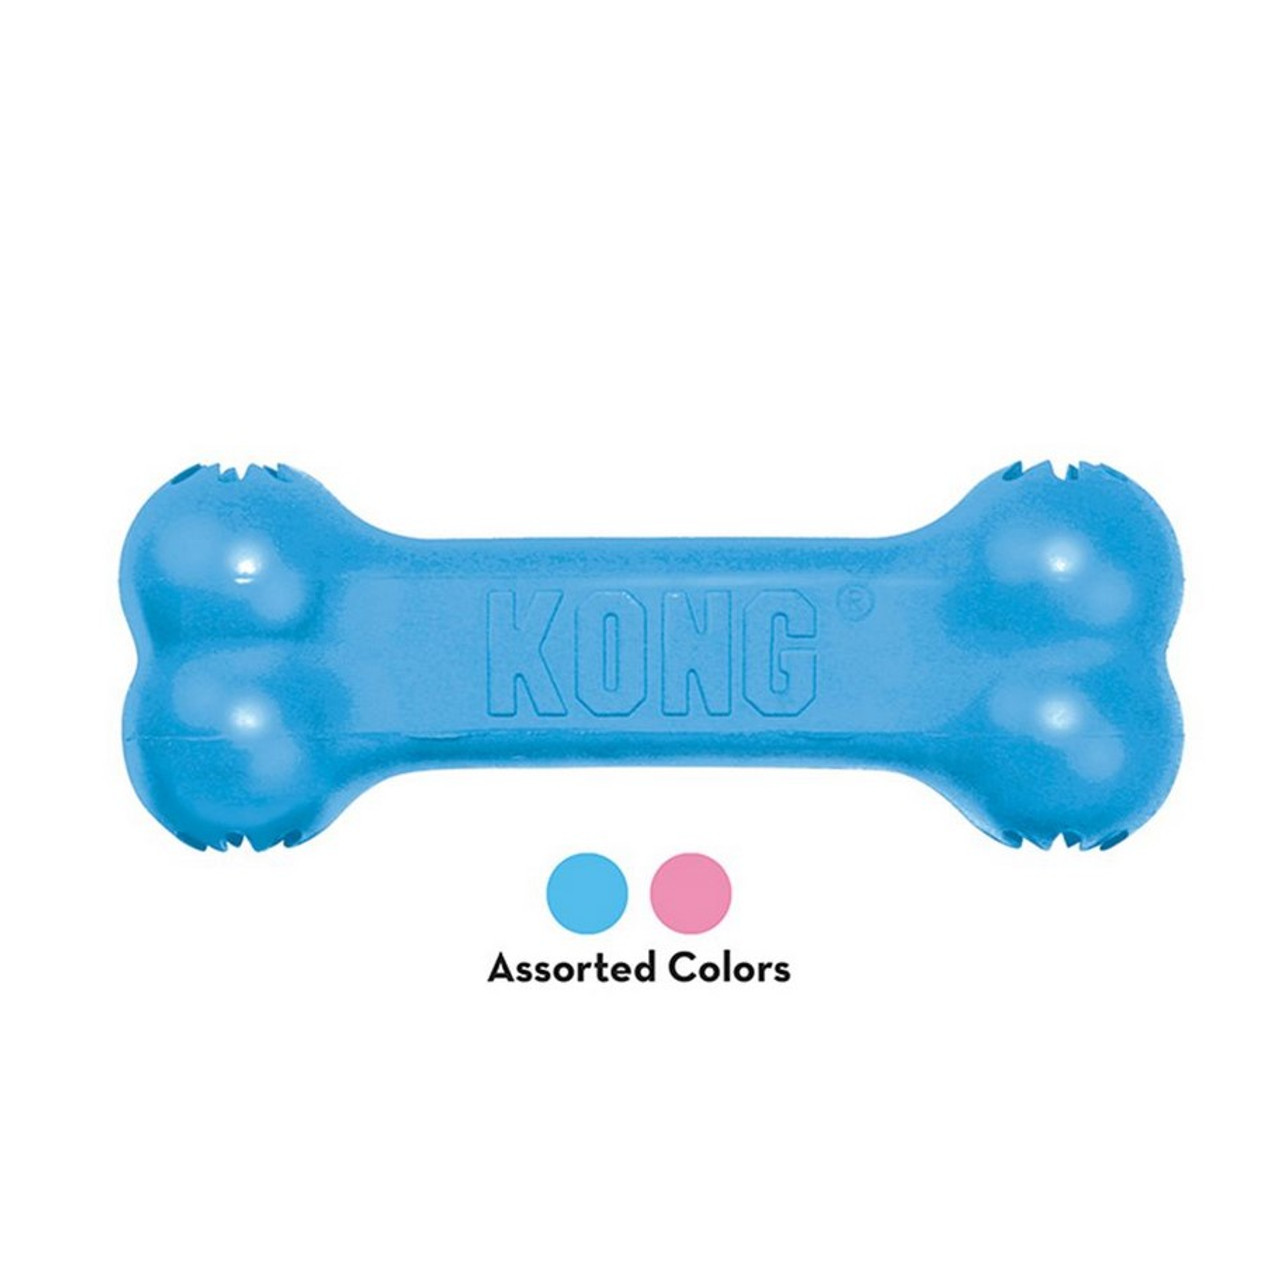 KONG Puppy Healthy Chewing Rubber Toy Small dog up to 20 lbs Blue NEW